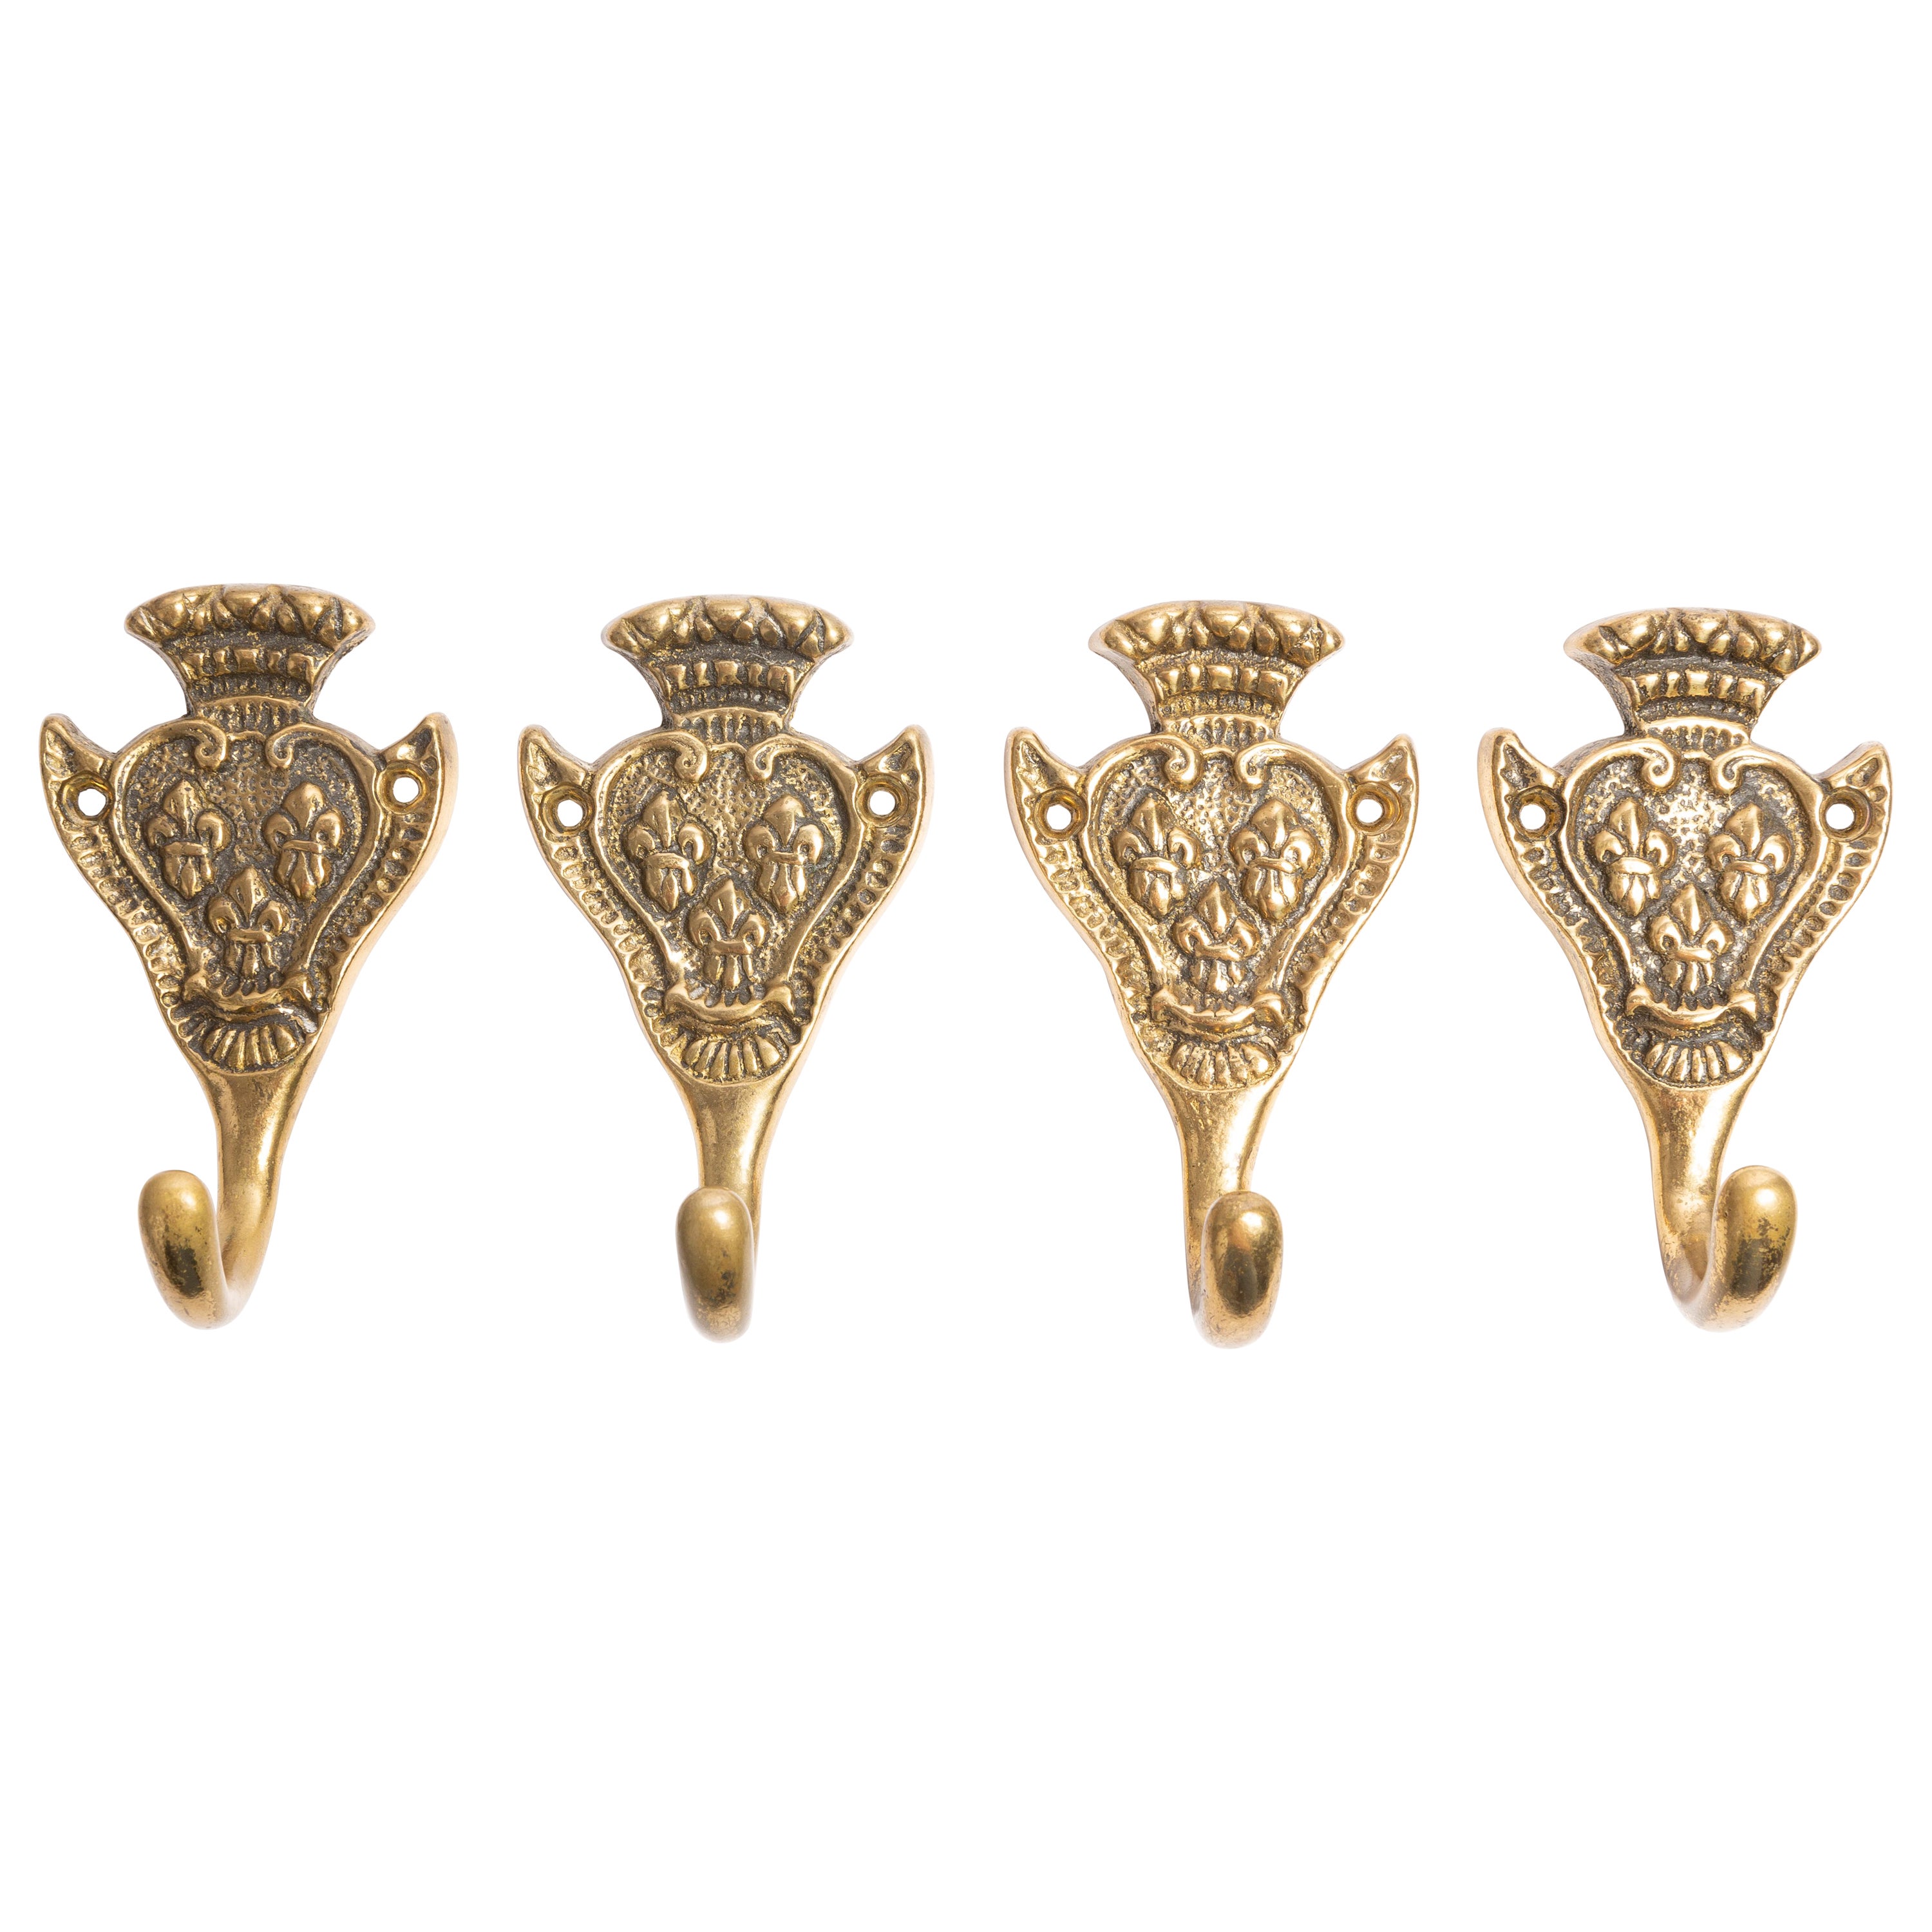 Set of Four Vintage Gold Decorative Wall Hangers, Europe, 1960s For Sale